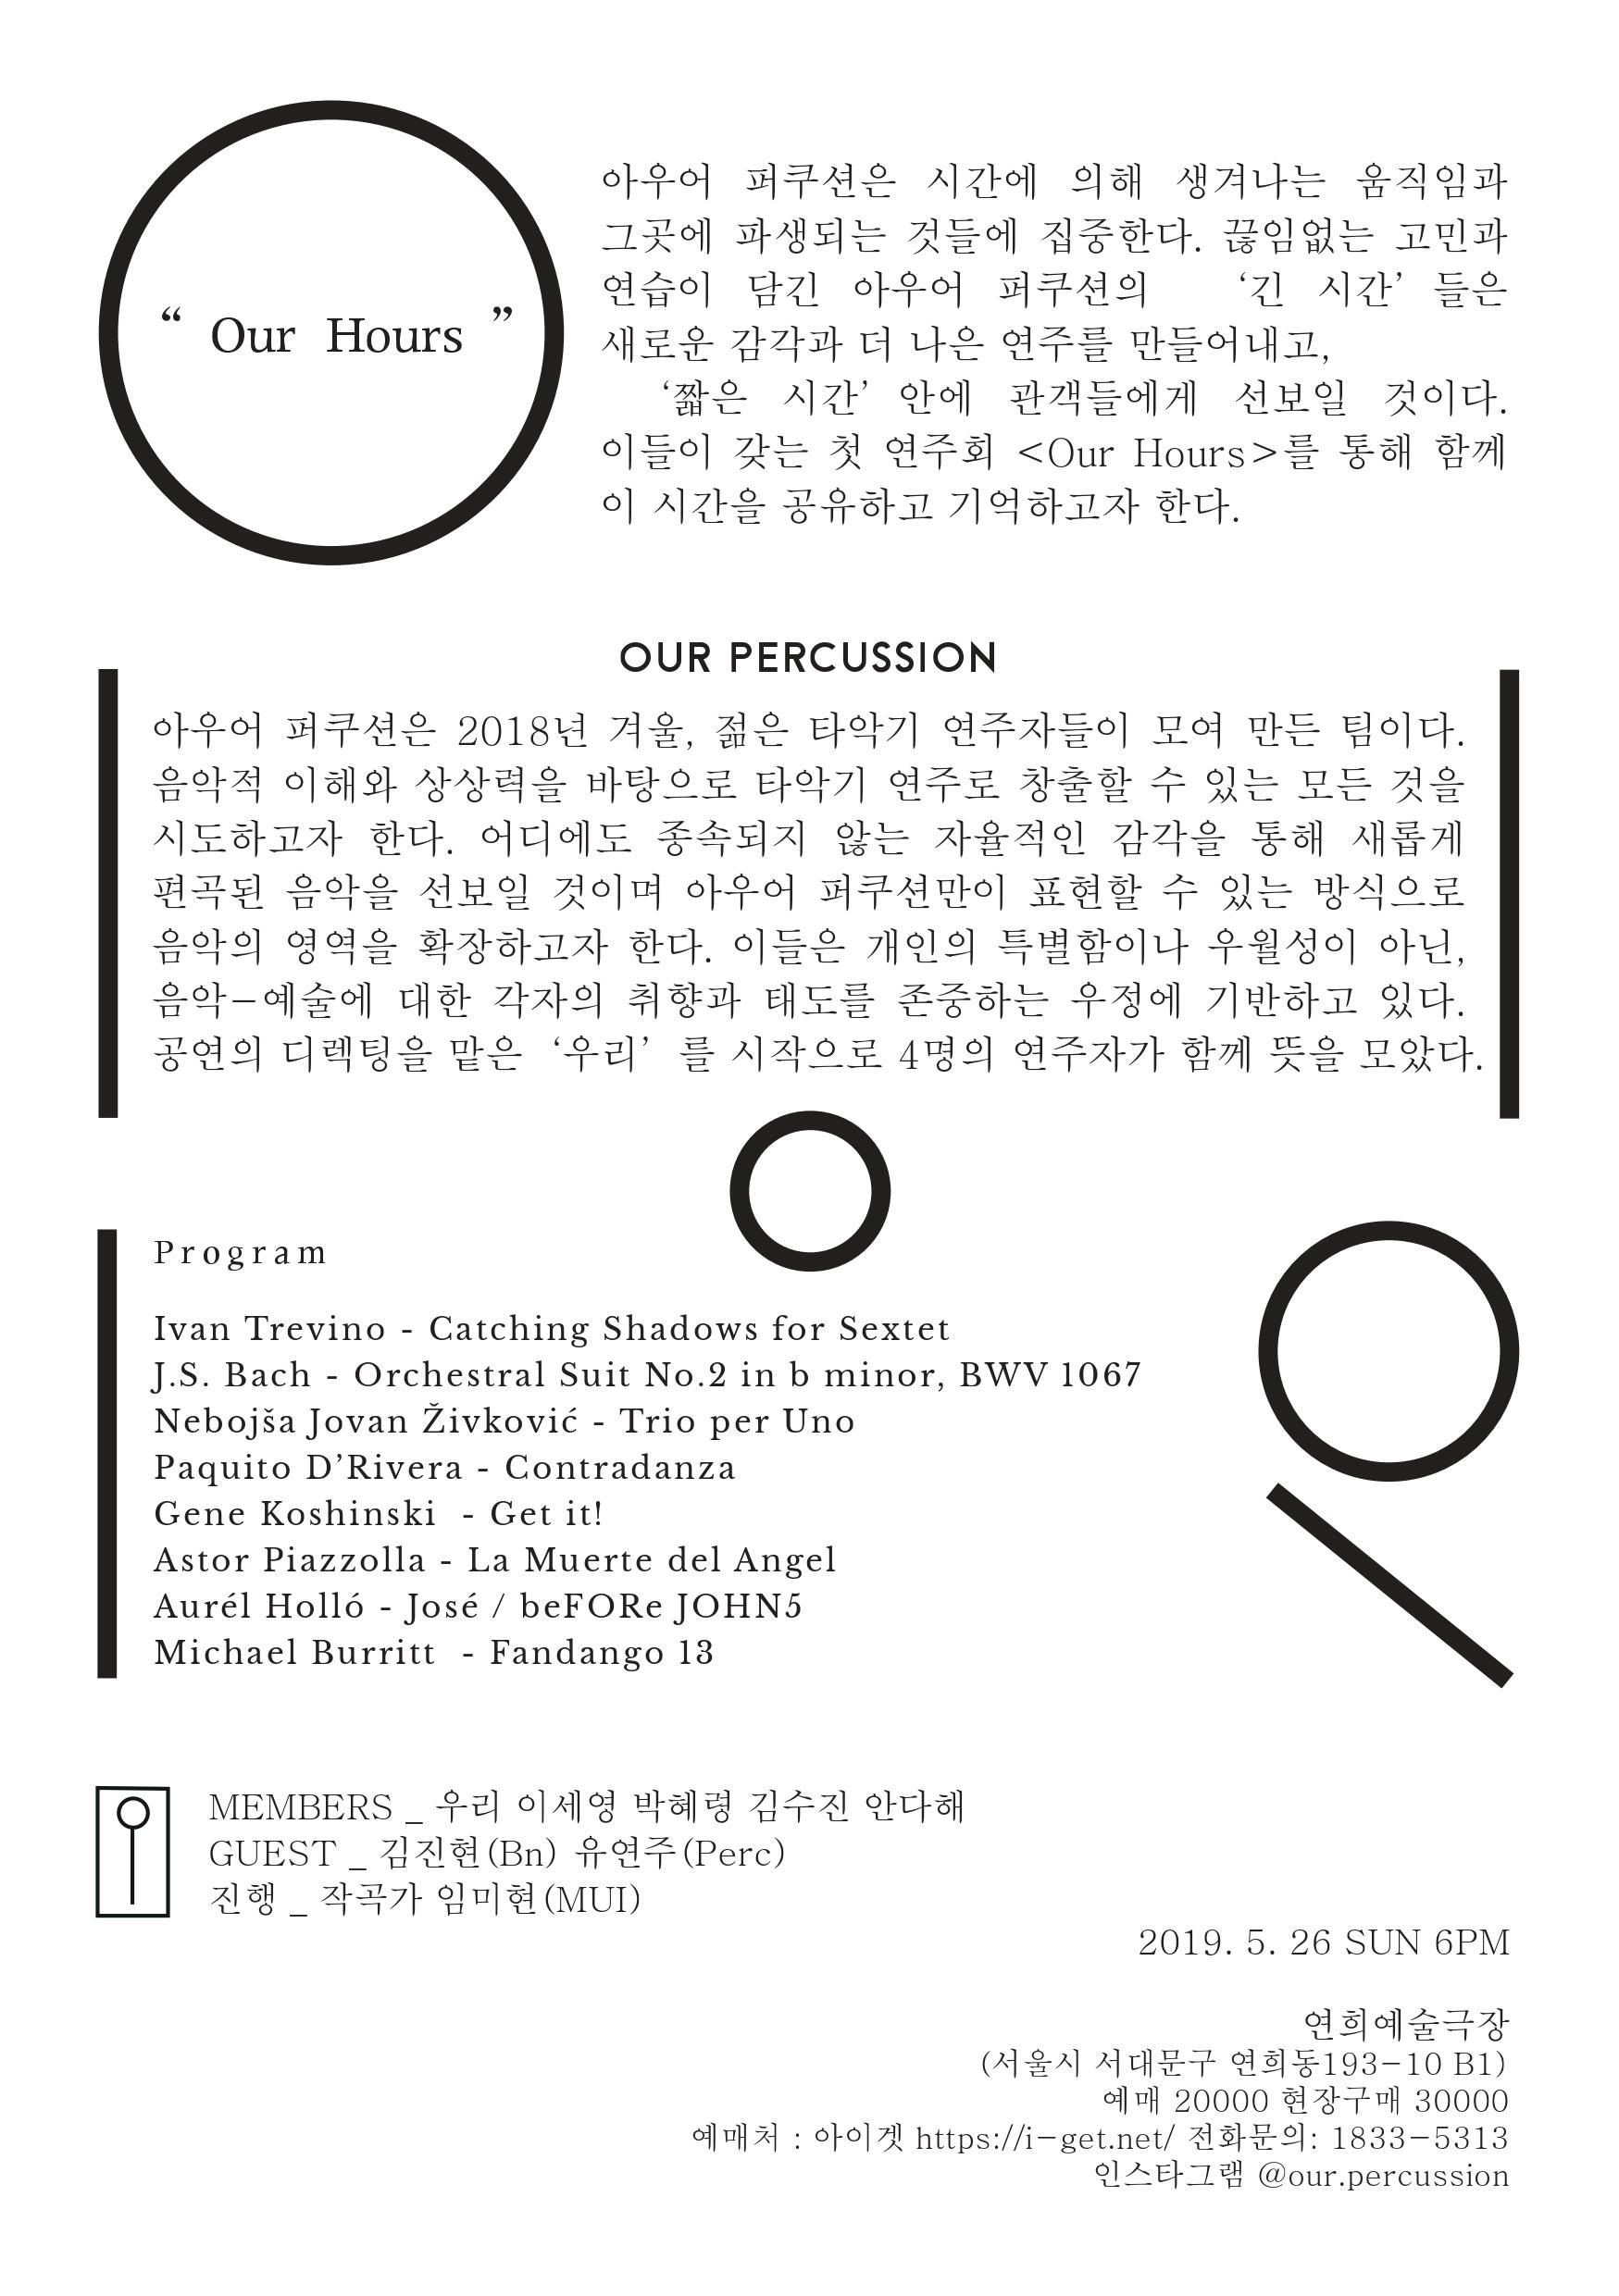 Our Percussion The 1st Concert "Our Hours" 이미지